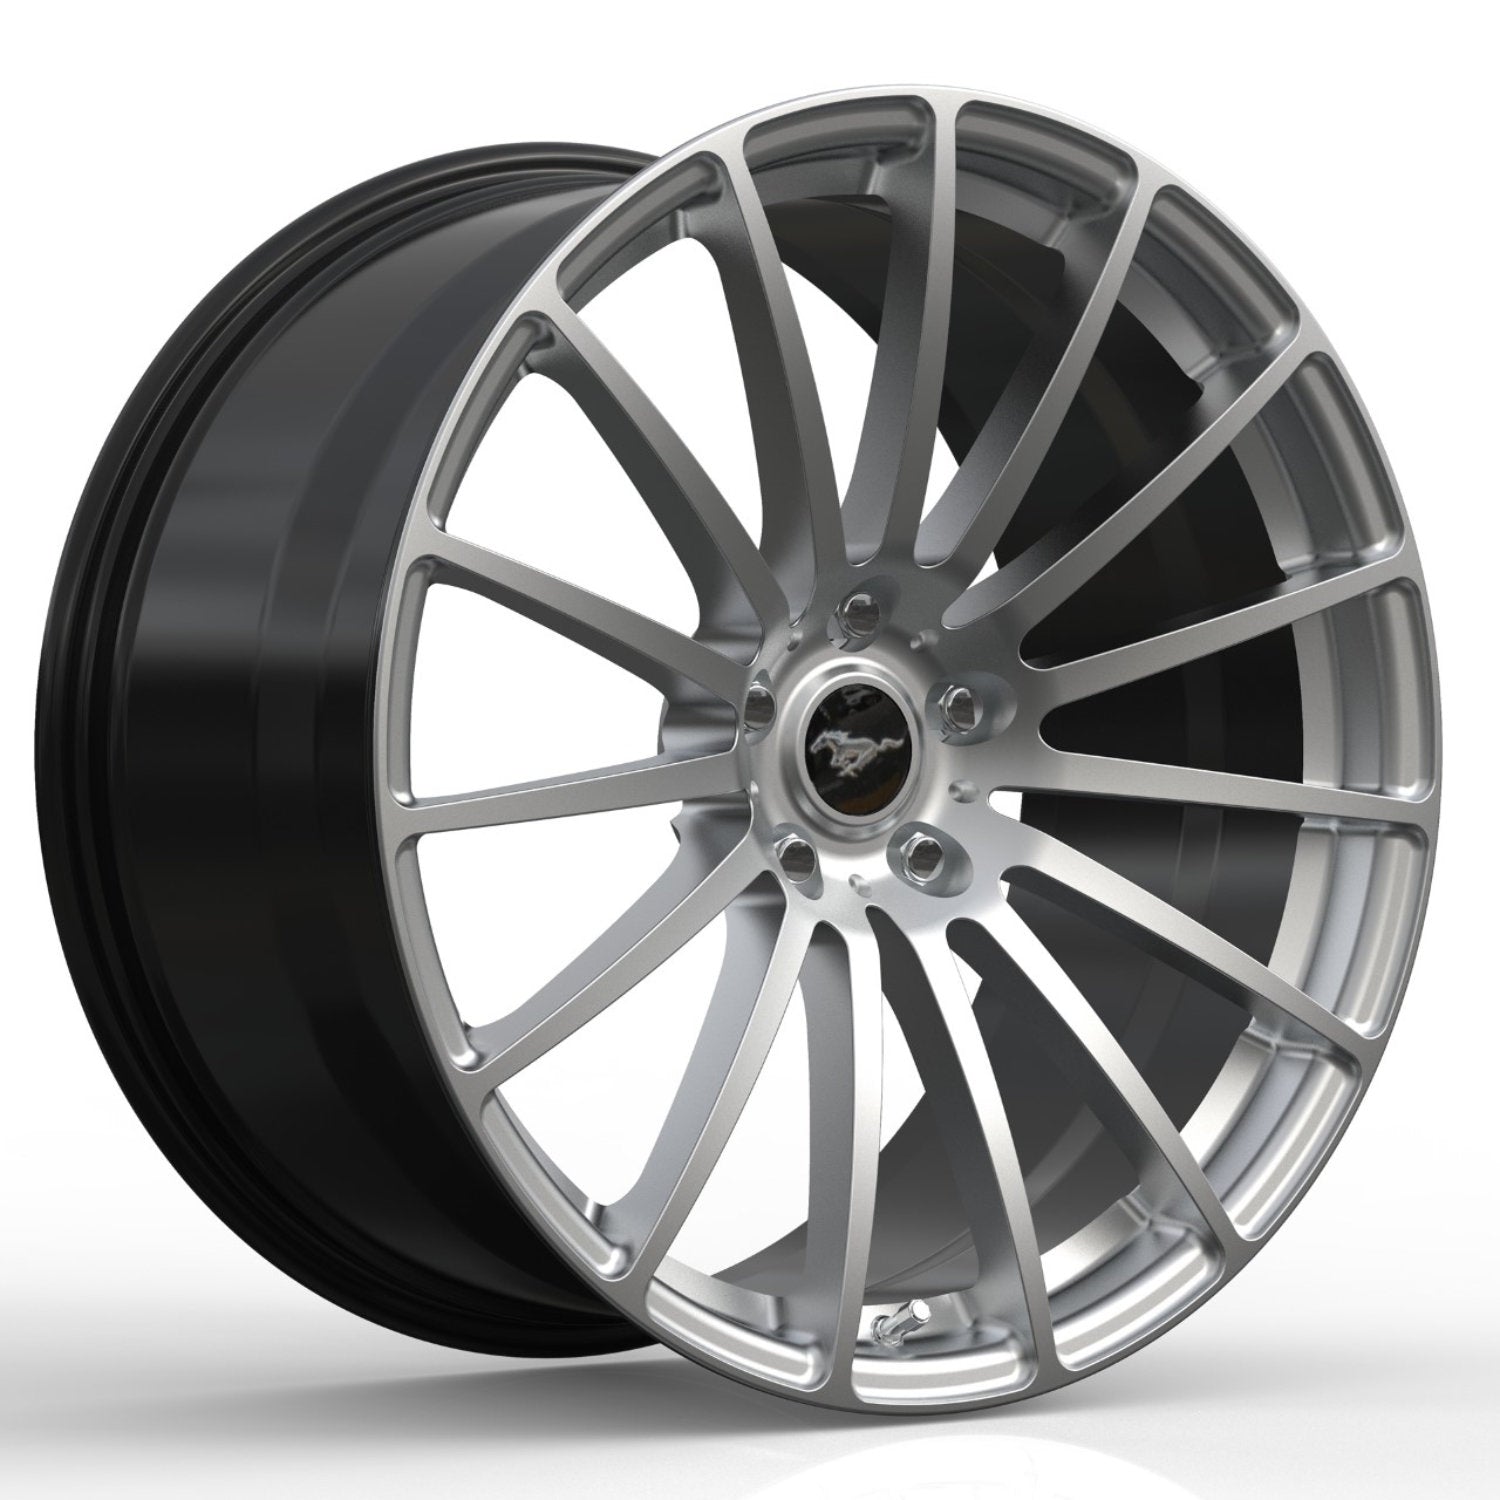 MMS 2015-24 Forged Concave-14 Wheel Set